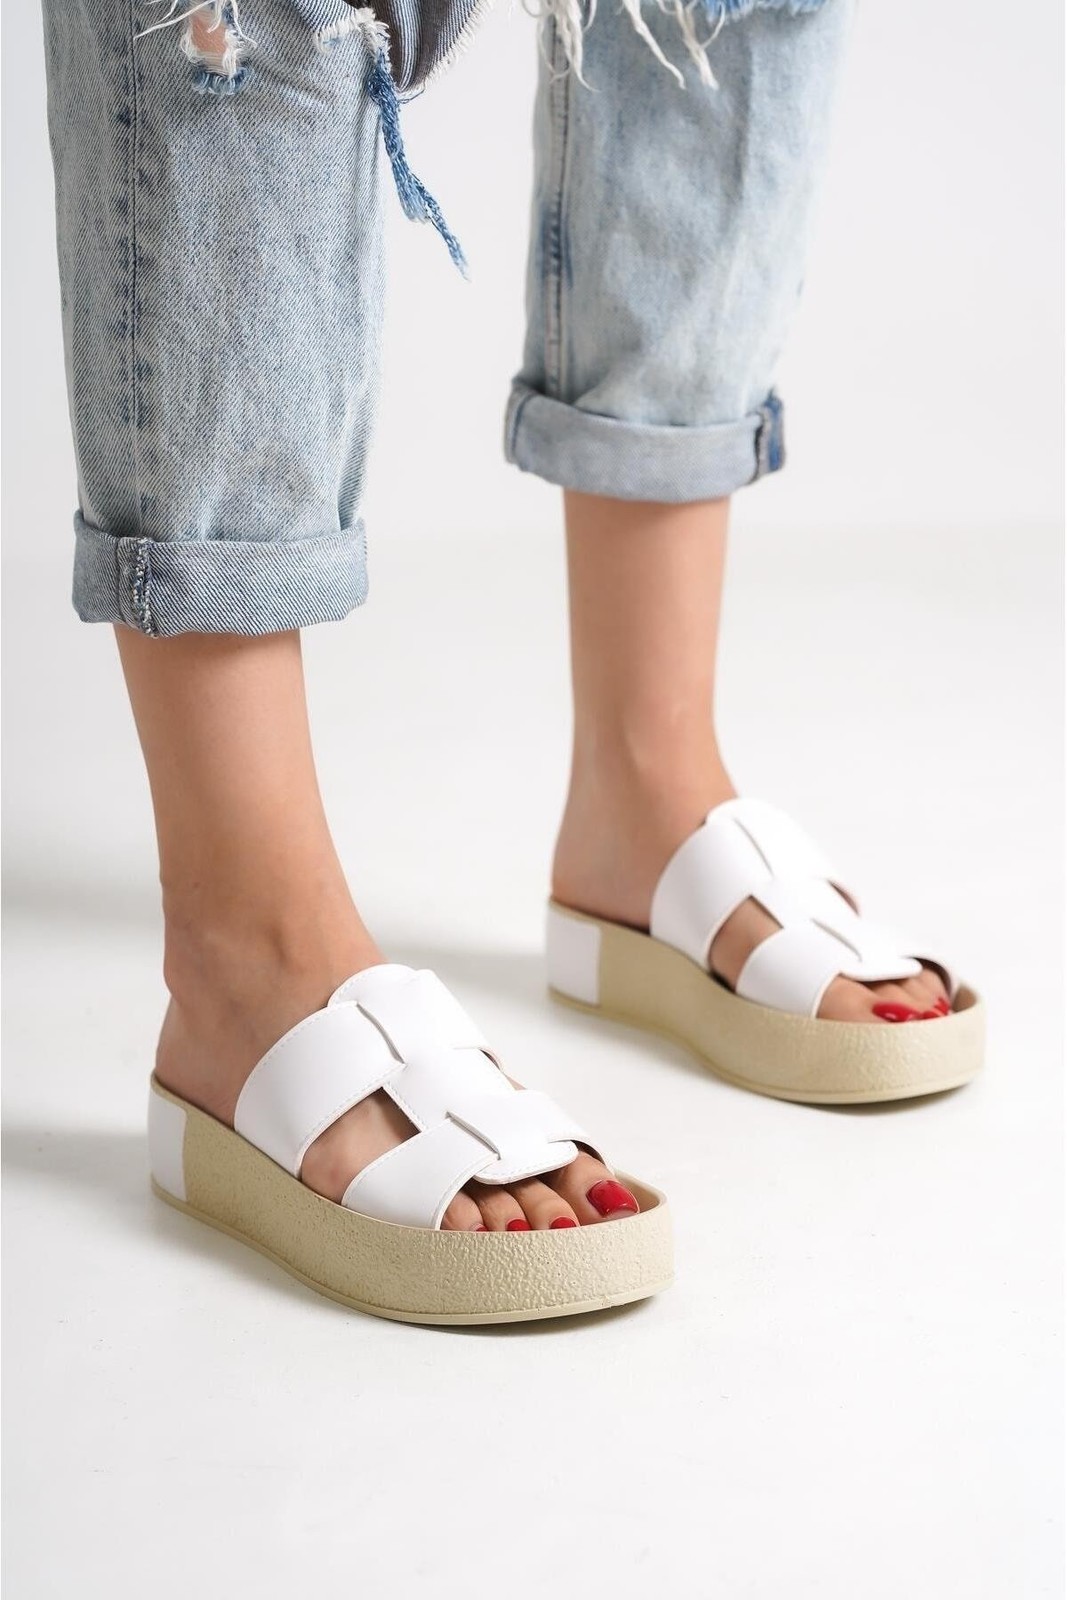 Capone Outfitters Capone Gladiator Double Straps Colorful Detailed Wedge Heels White Women's Slippers.